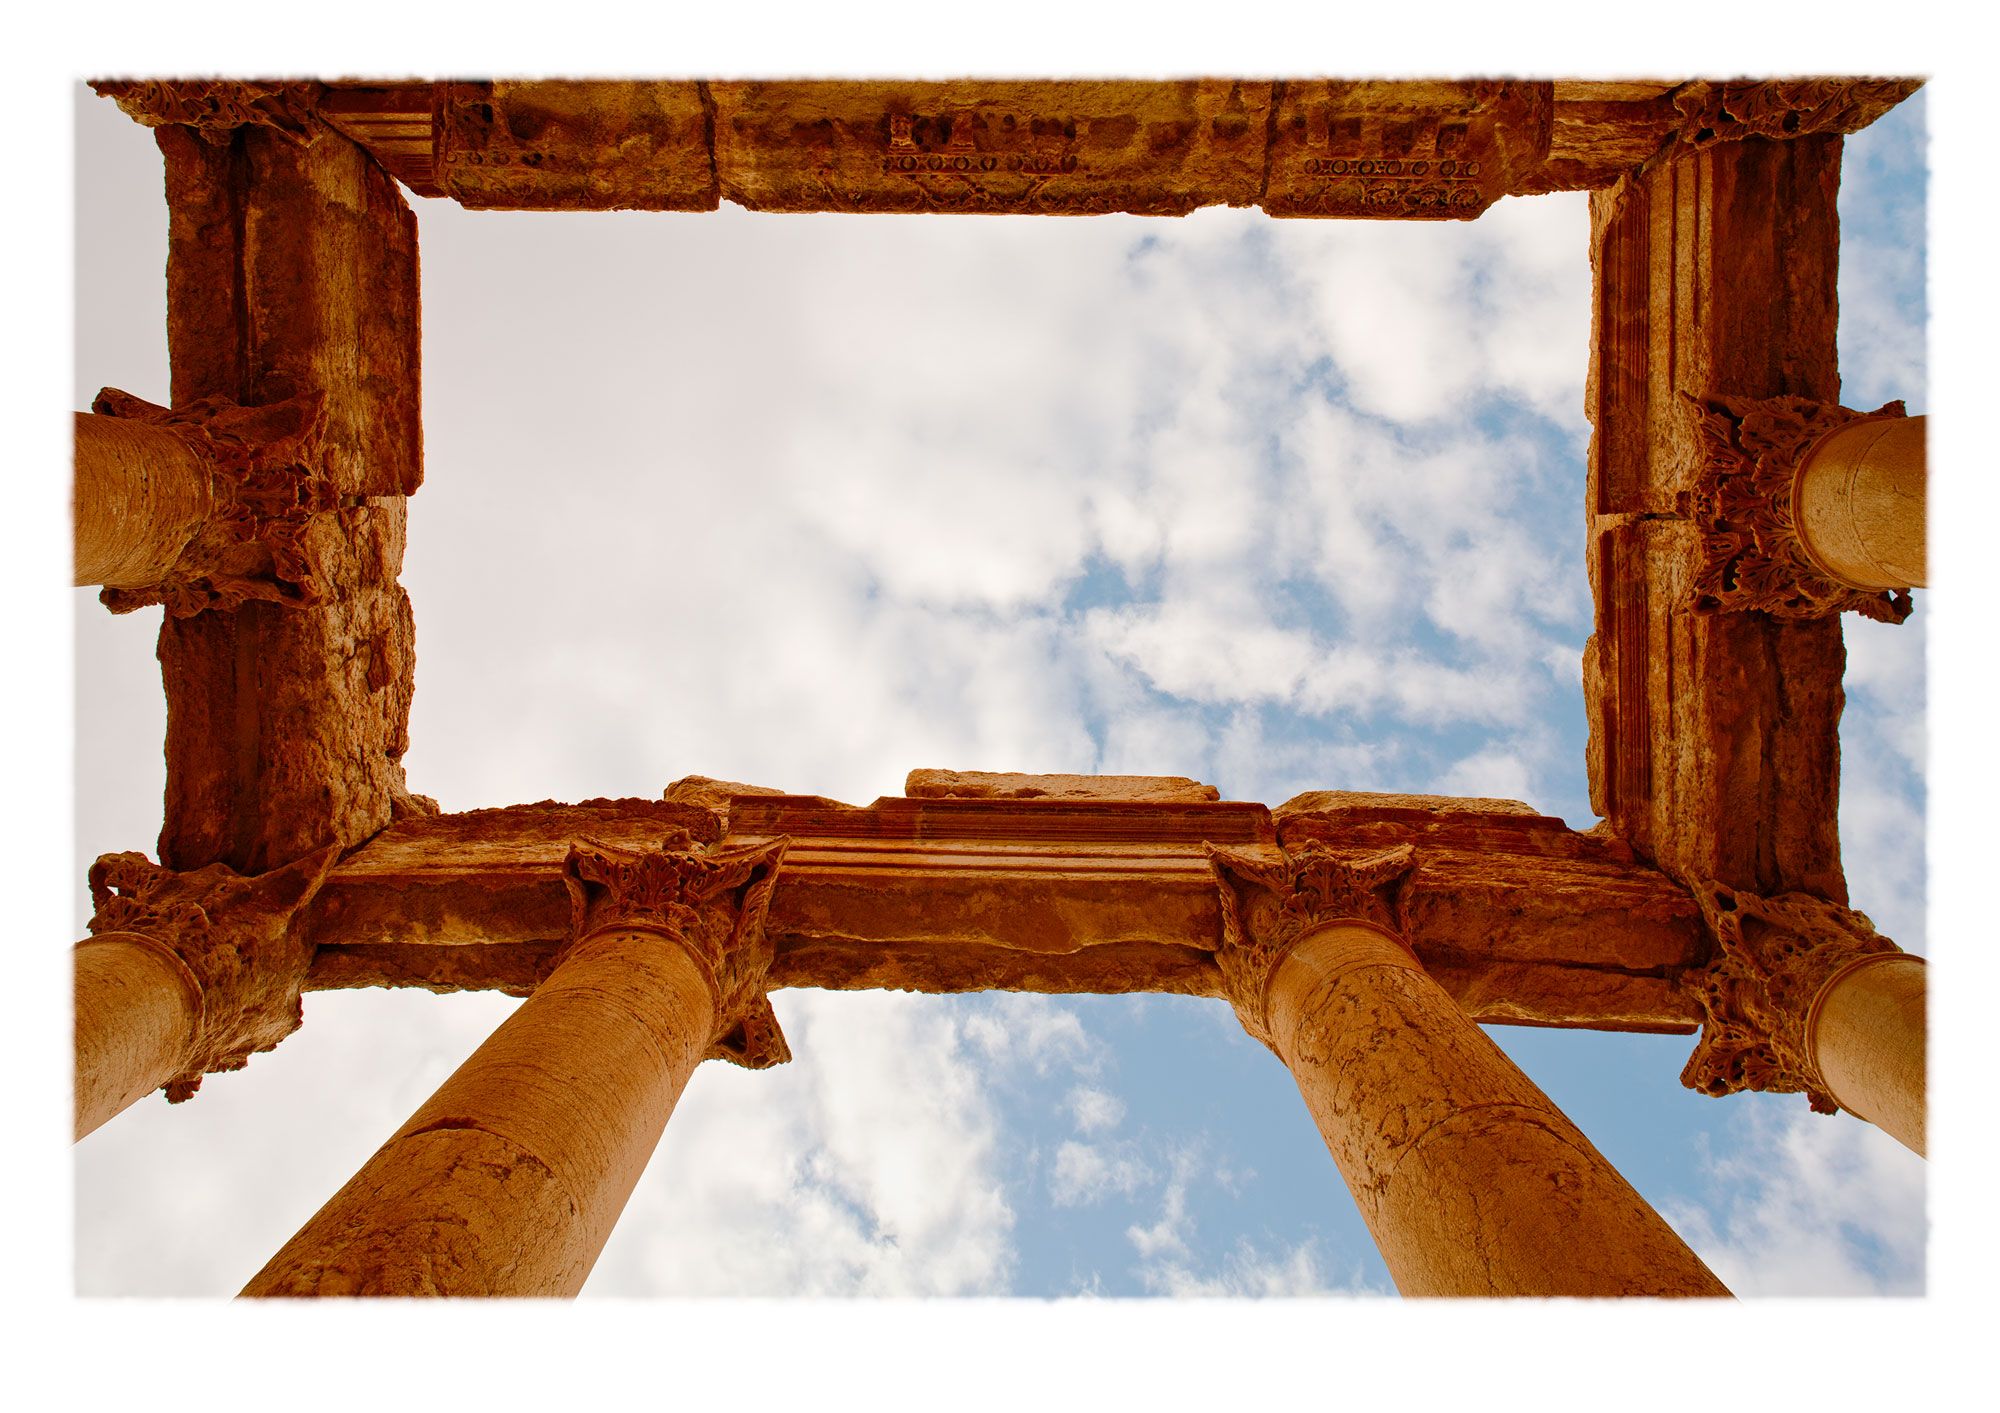 View upwards through Corinthian capitals of furled acanthus leaves with eroded entablature, sky and clouds. Destroyed Palmyra, Syria.